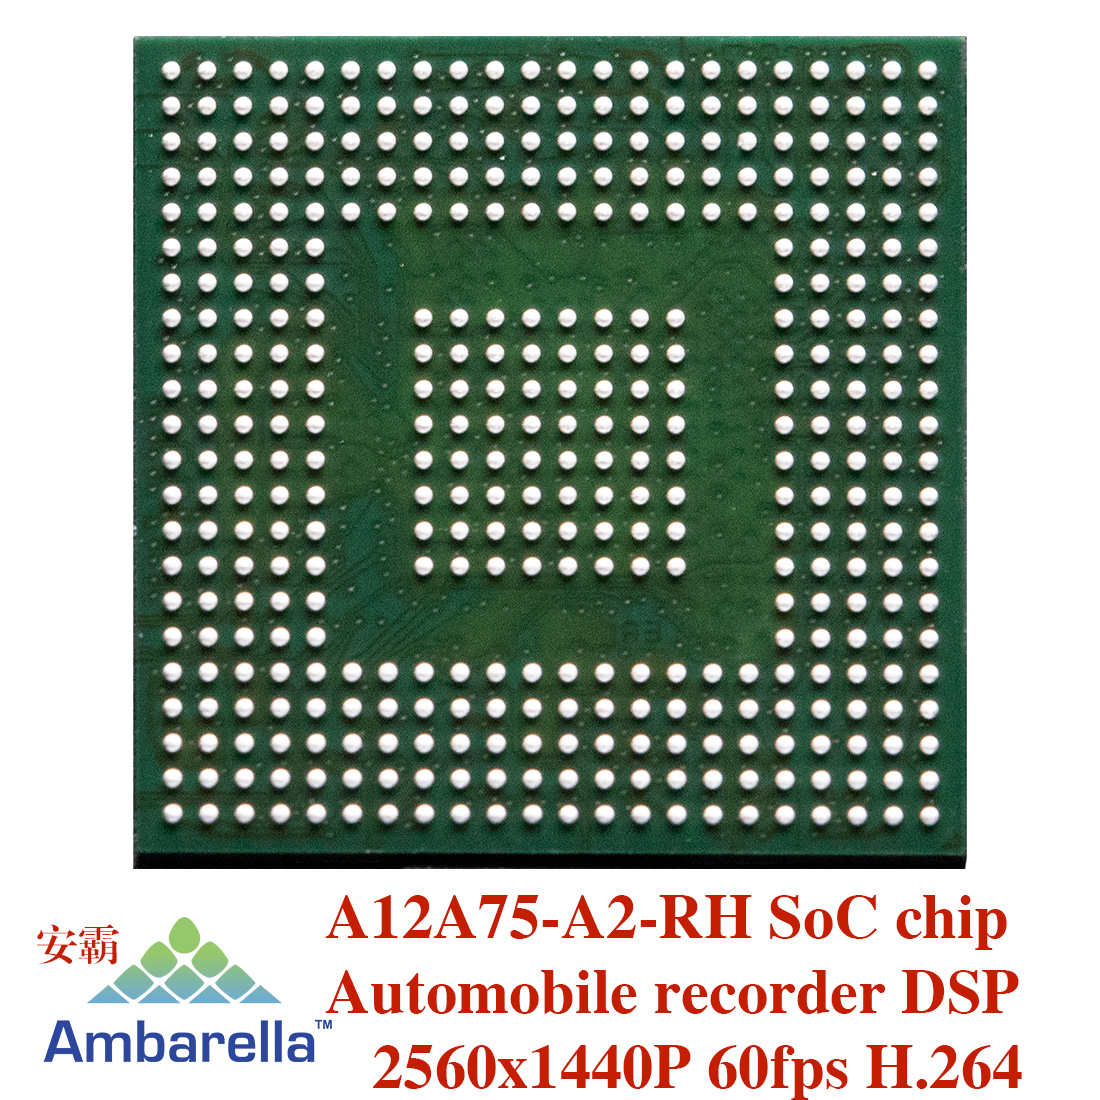 A12A75， automotive recorder, automotive black box chip, Aerial camera chip，action camera chip, image and video processor IC(ISP), Digital Signal processor (DSP), 2560x1440p@60fps controllor chip, Integrated System on Chip (Soc) platform, single-channel and multi-channel automotive camera IC, H.264 encoder, Video compression chip